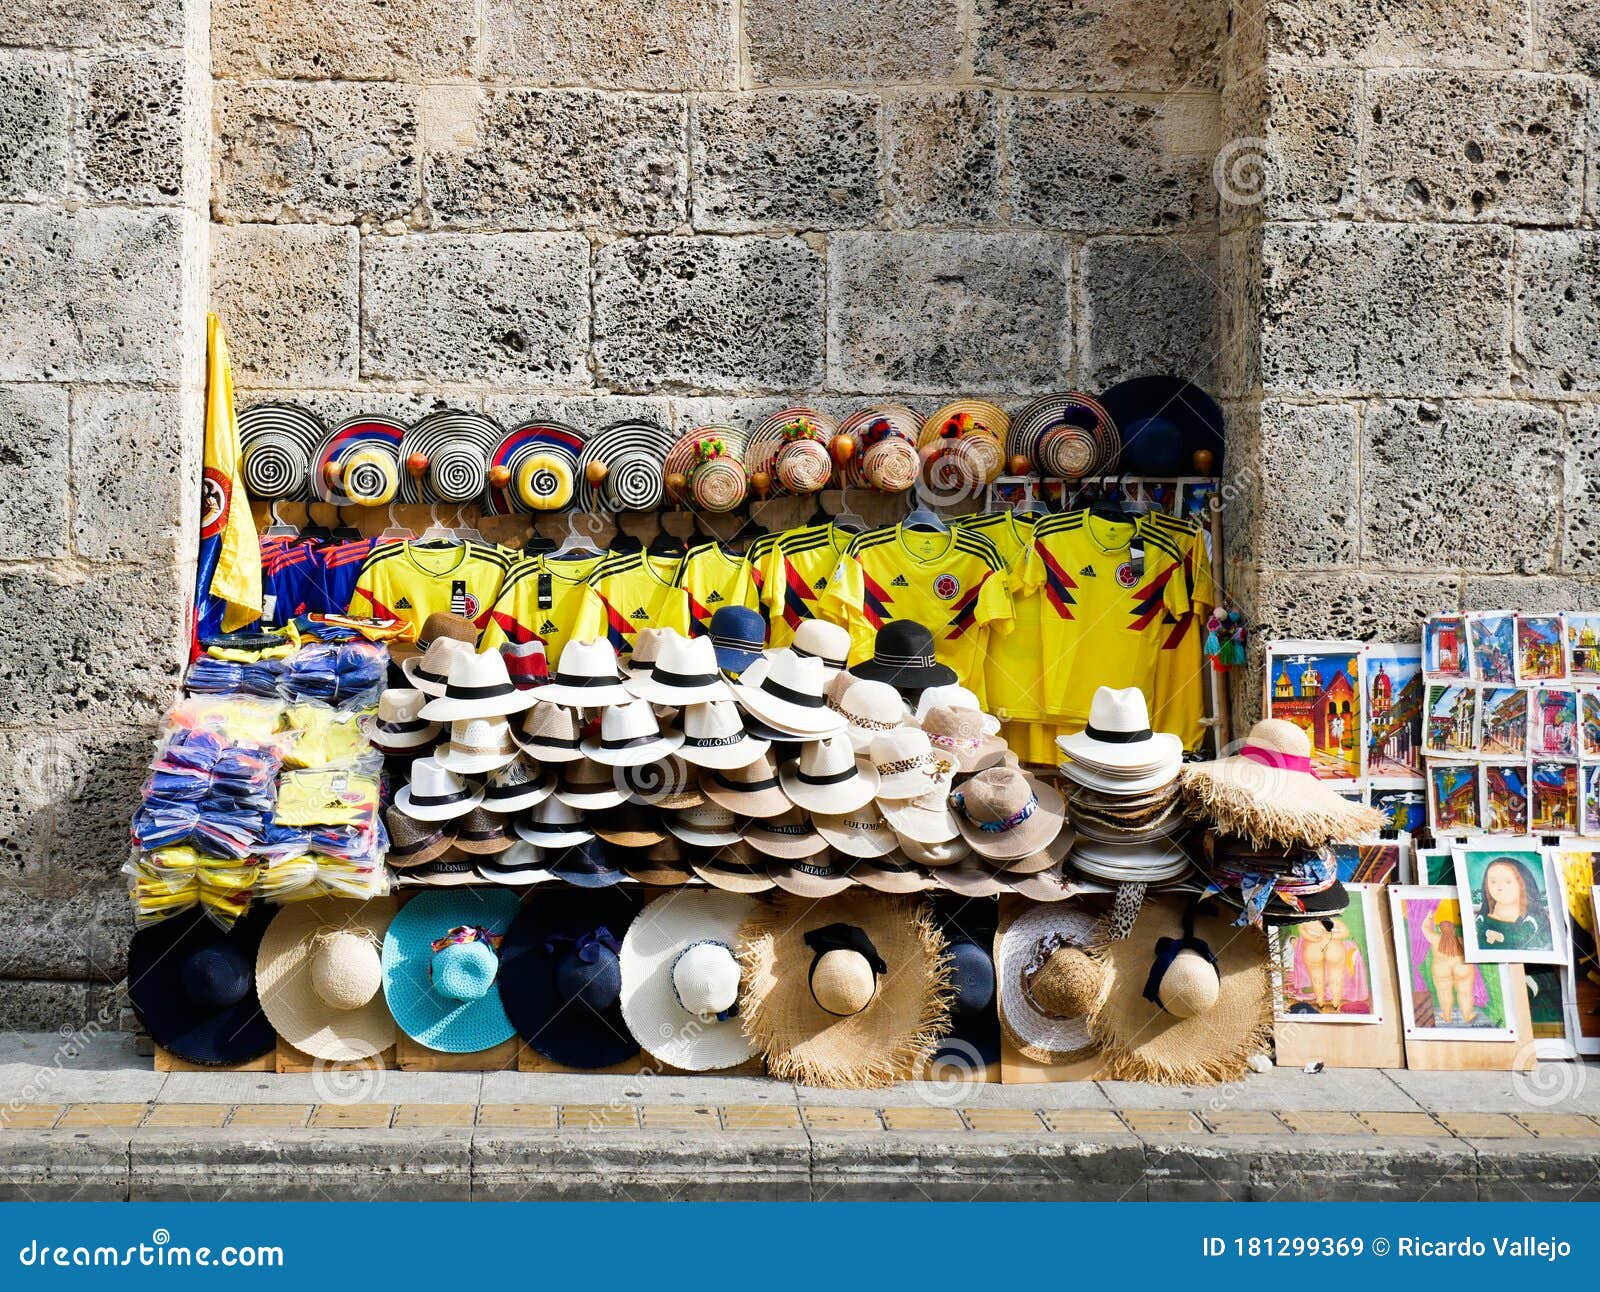 kathedraal Corporation hoed Colombian Soccer Team Shirts for Sale on a Street of Old Cartagena Colombia  with Colorful Hats and Copies of Botero Paintings Editorial Stock Image -  Image of culture, merchandising: 181299369